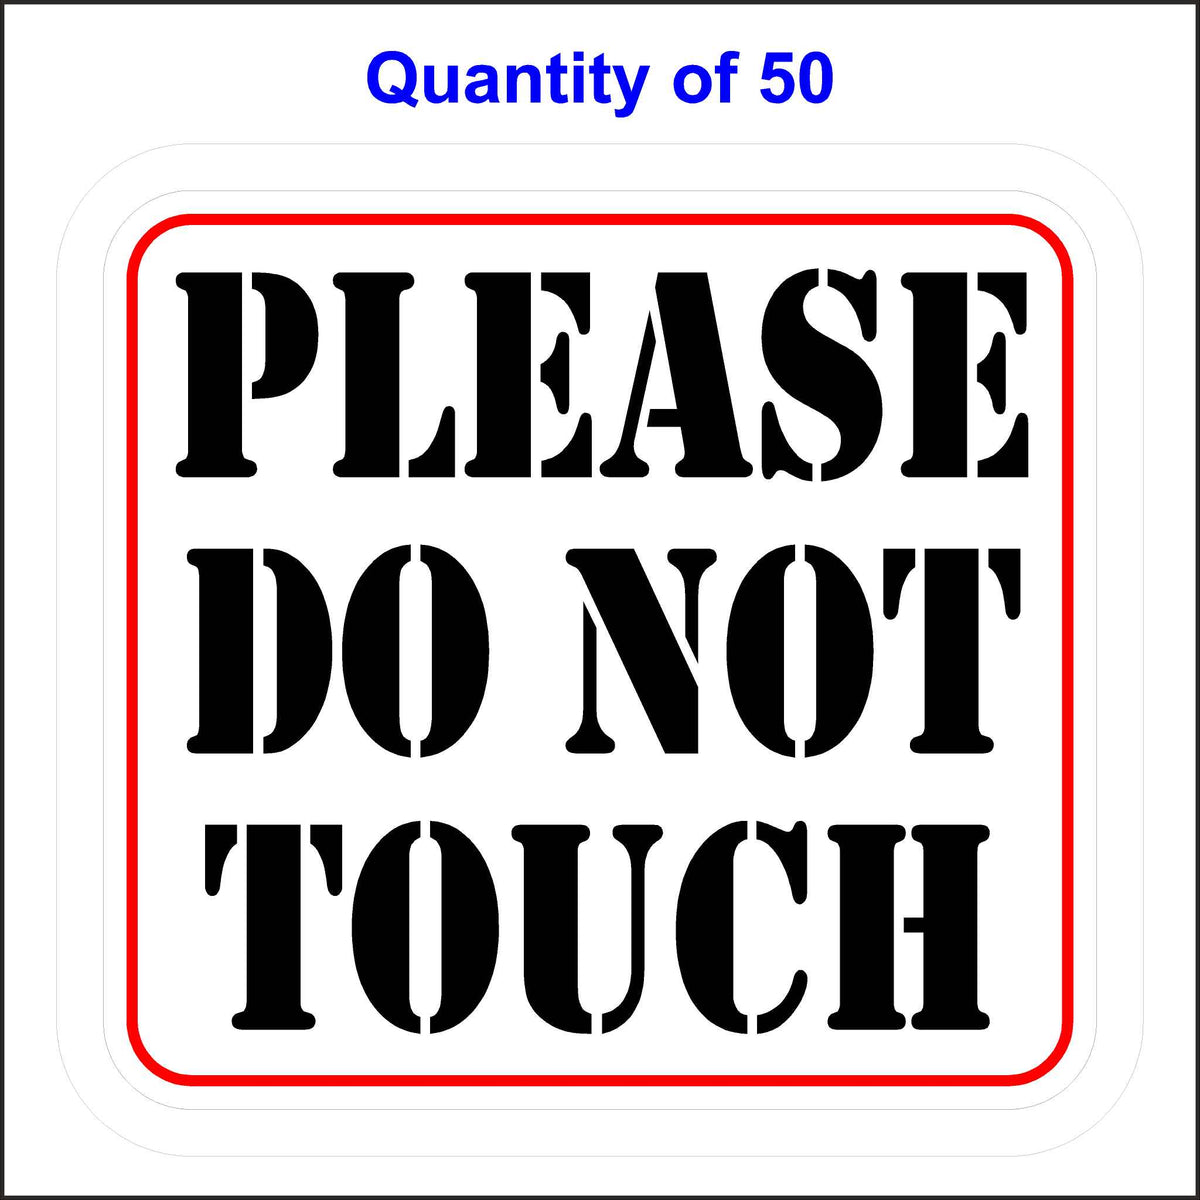 Please Do Not Touch Sticker With A White Background, Black Letters and Red Outline. 50 Quantity.